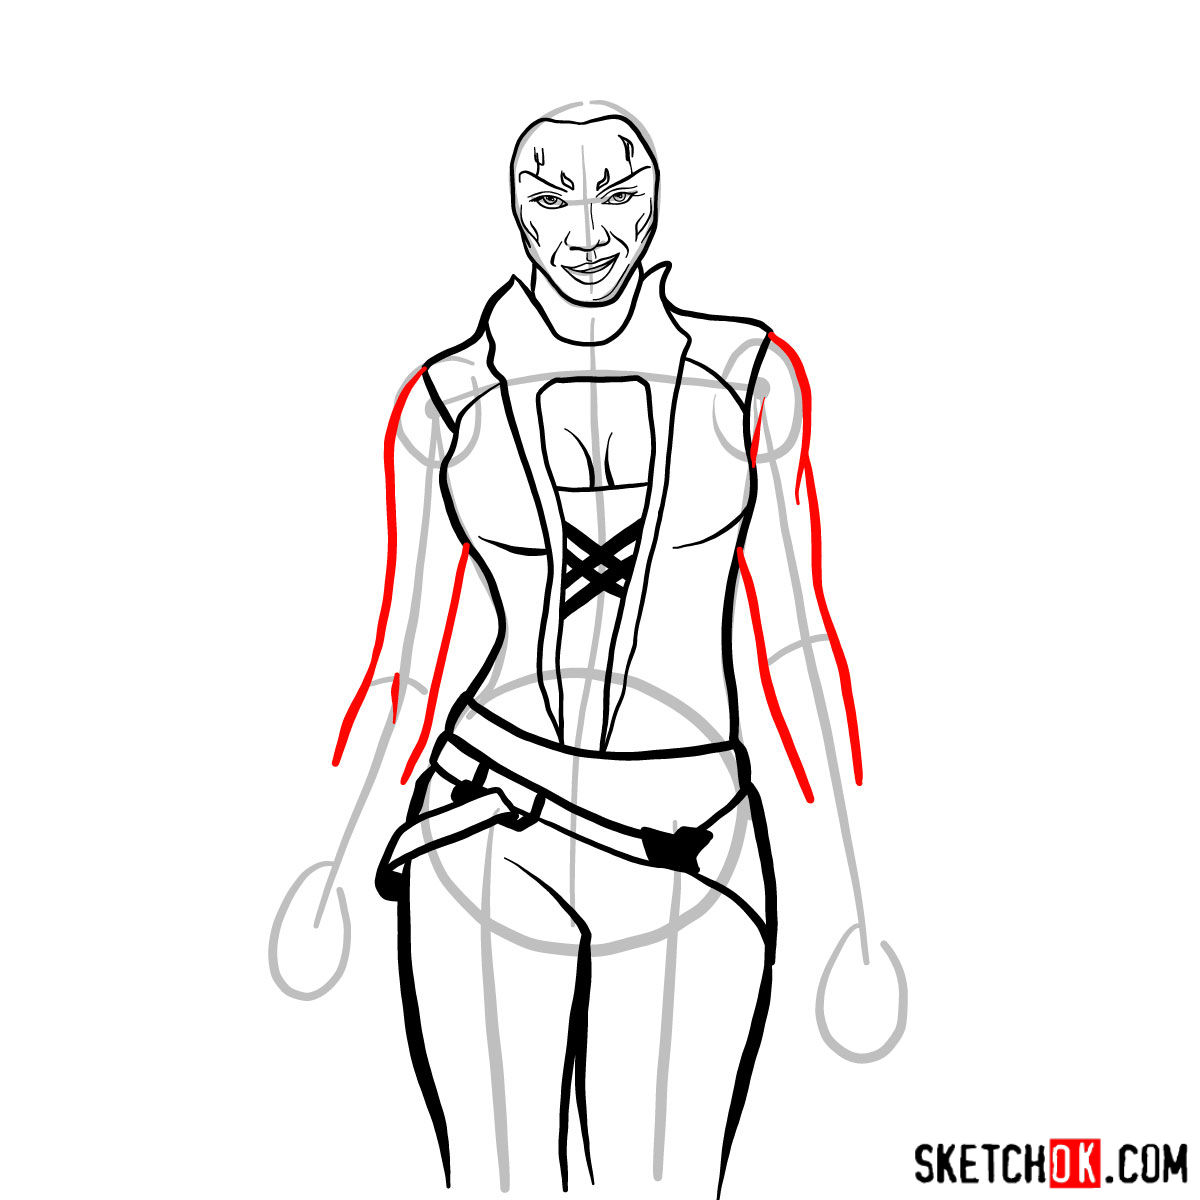 How to draw Gamora from Guardians of the Galaxy - step 09